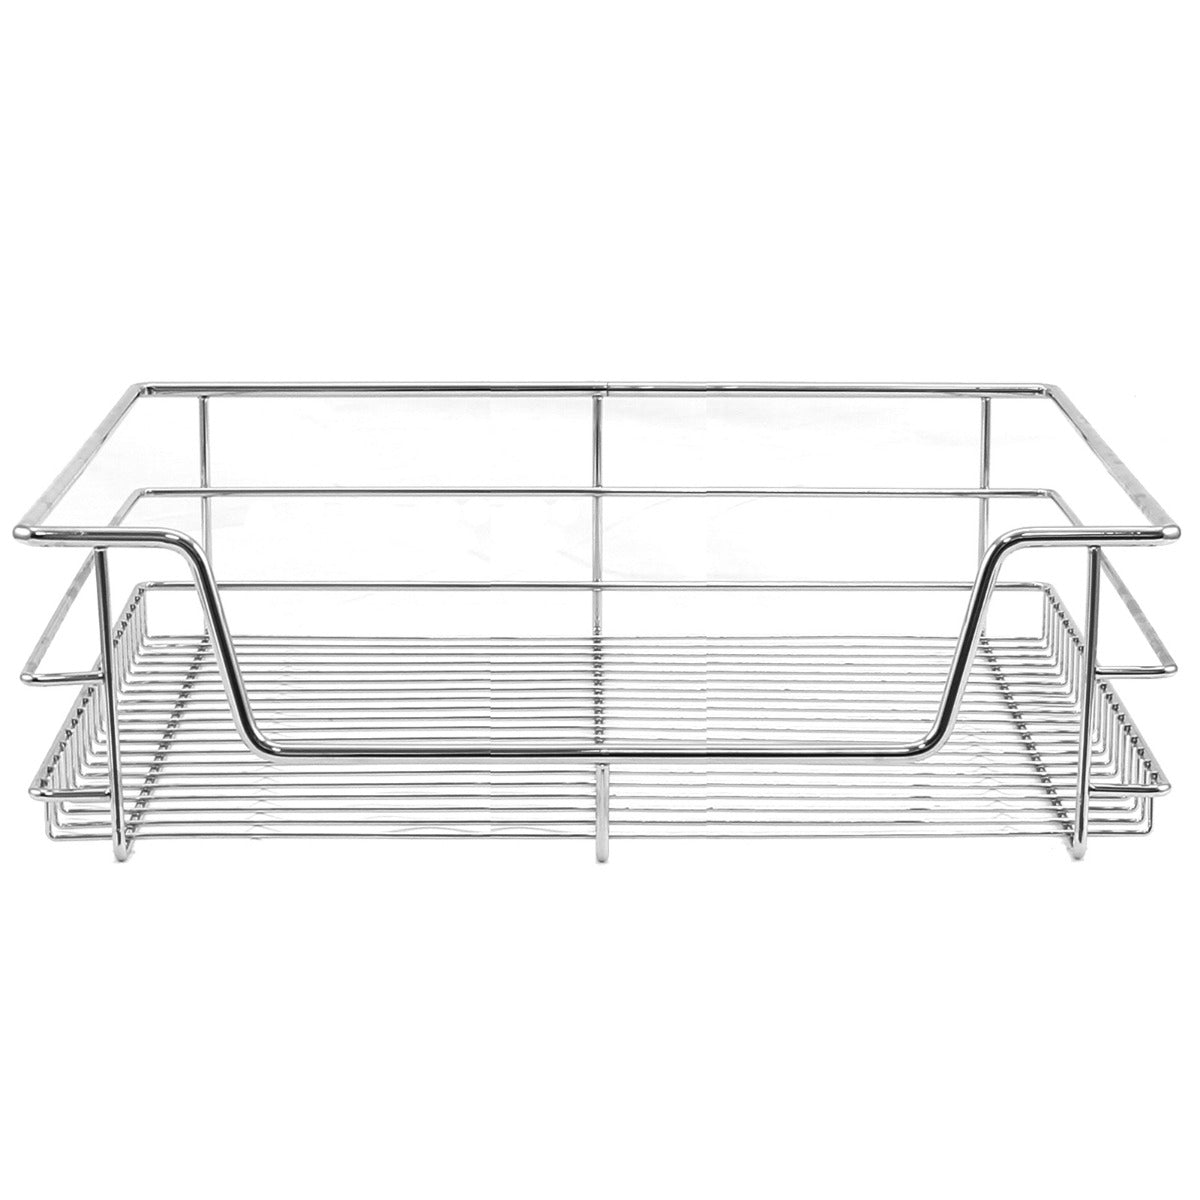 4 x KuKoo Kitchen Pull Out Storage Baskets – 600mm Wide Cabinet